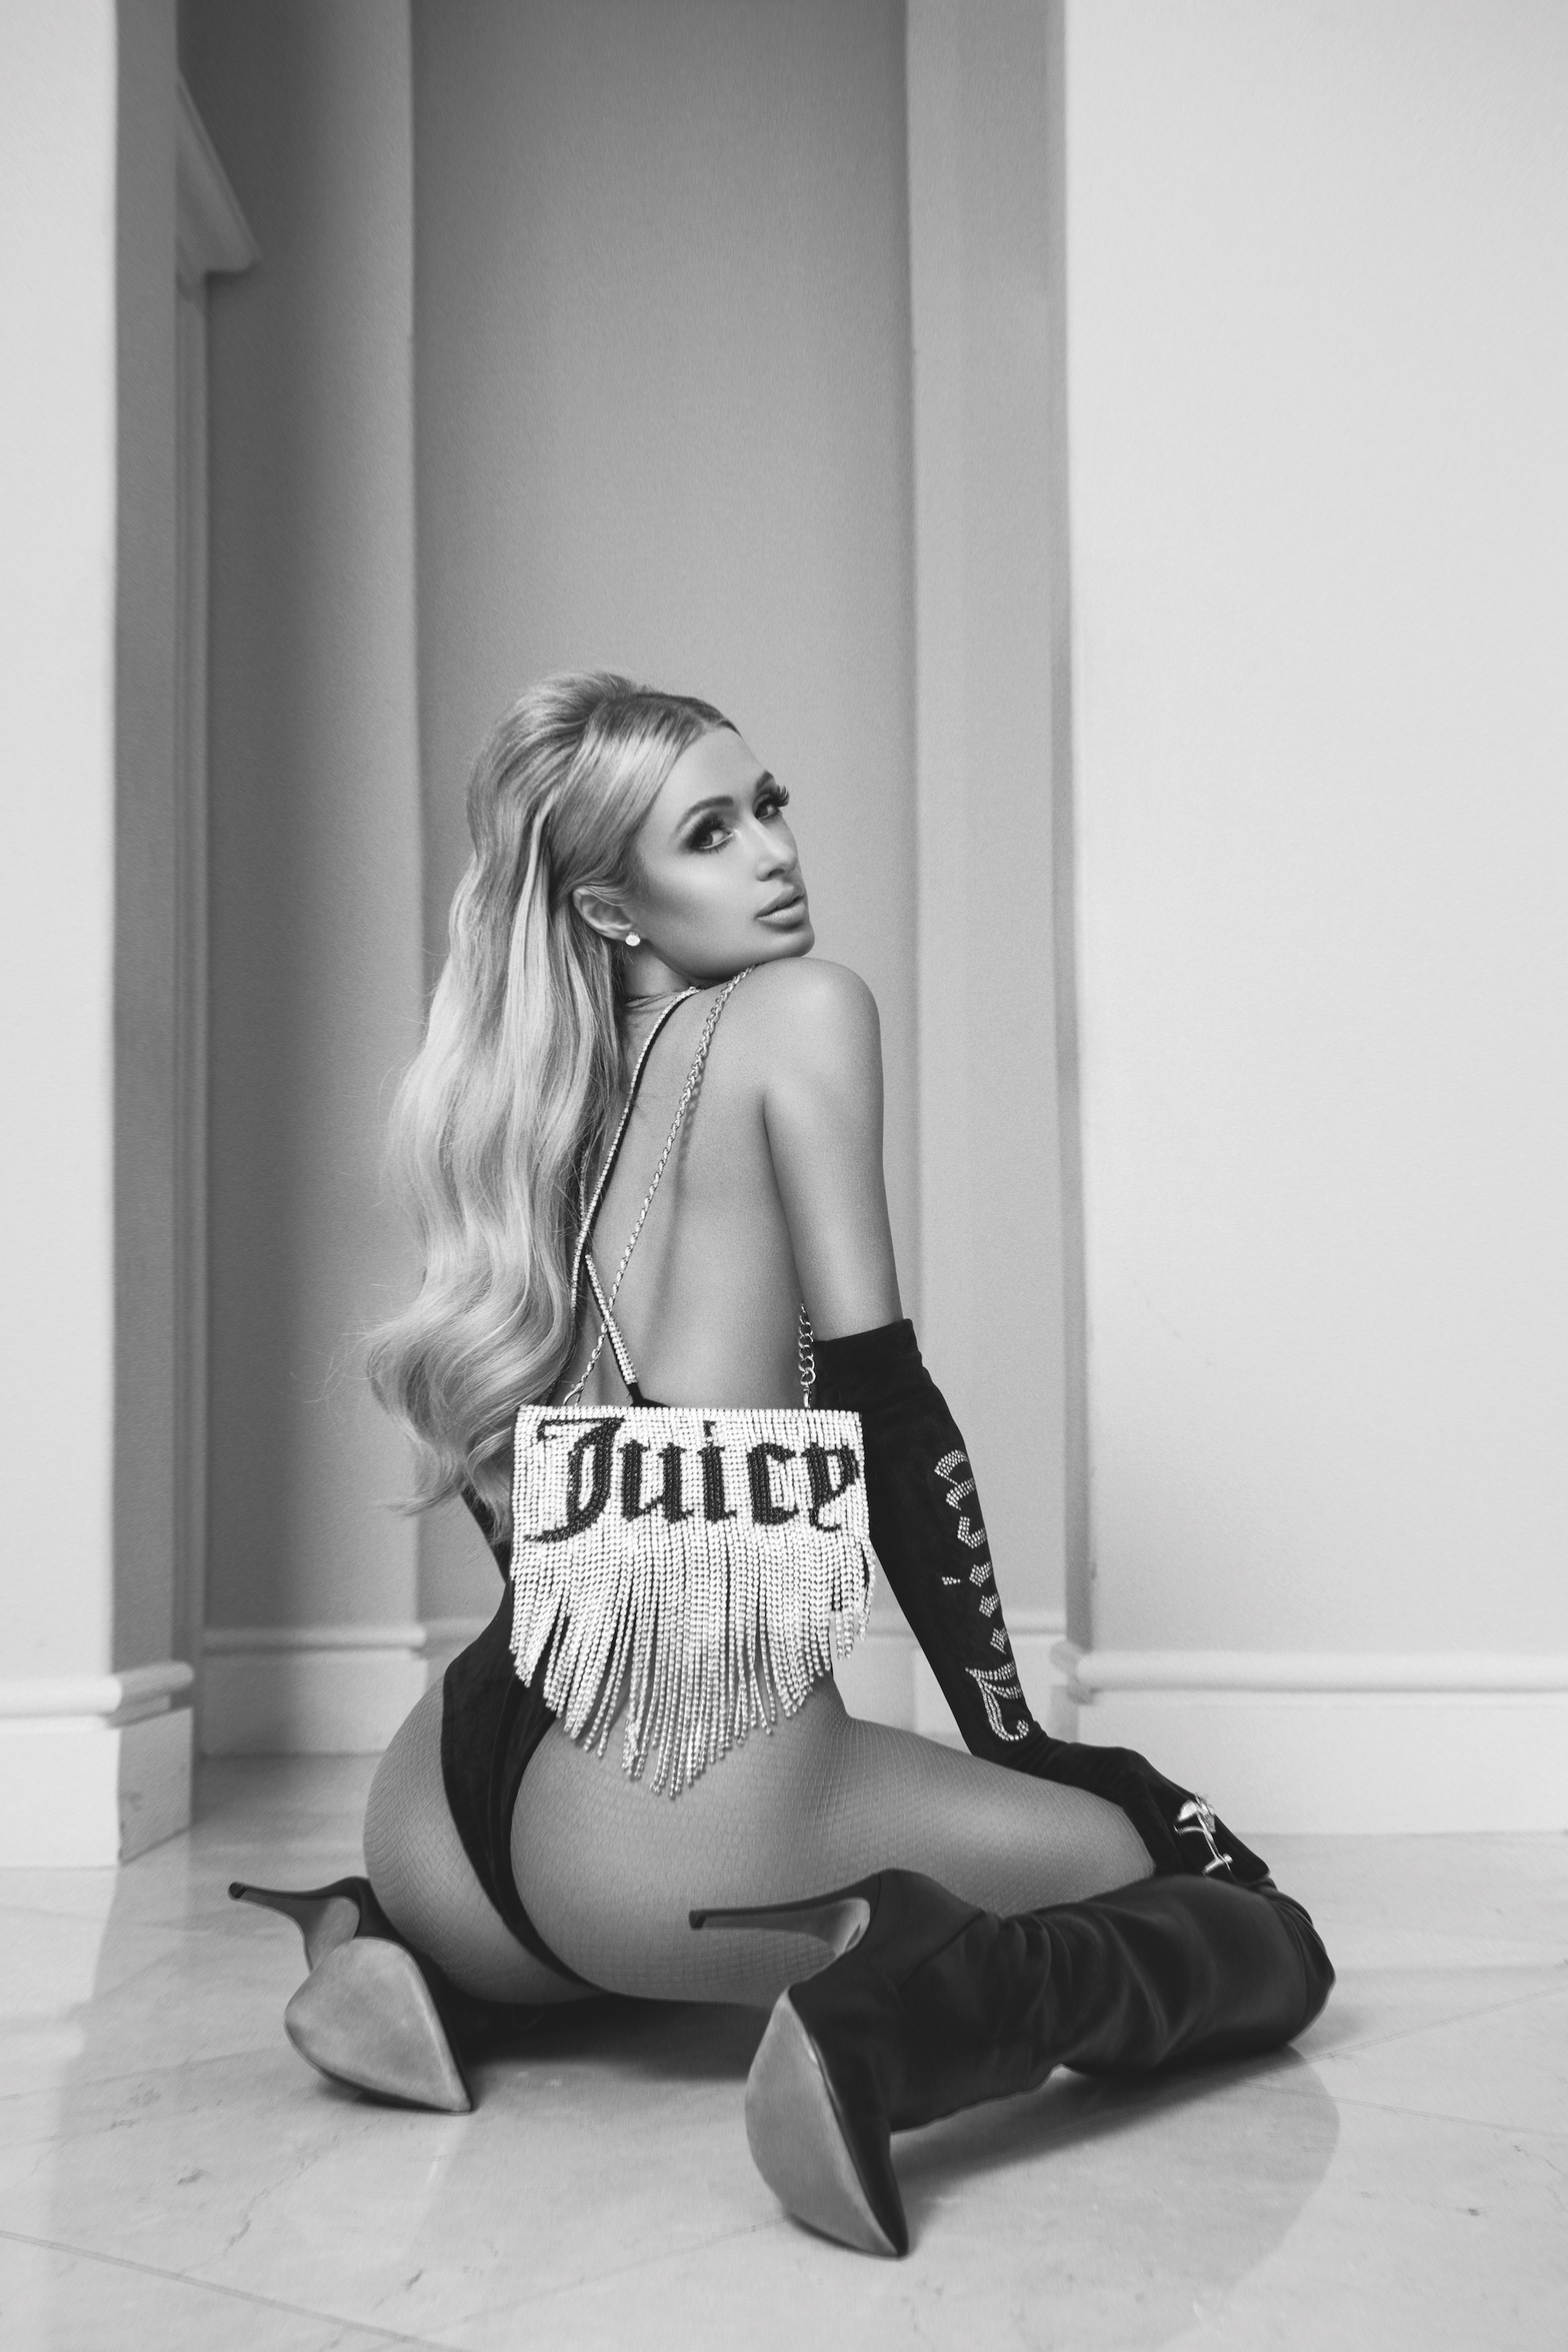 Paris Hilton Oozing Sex Appeal in New Shoot!